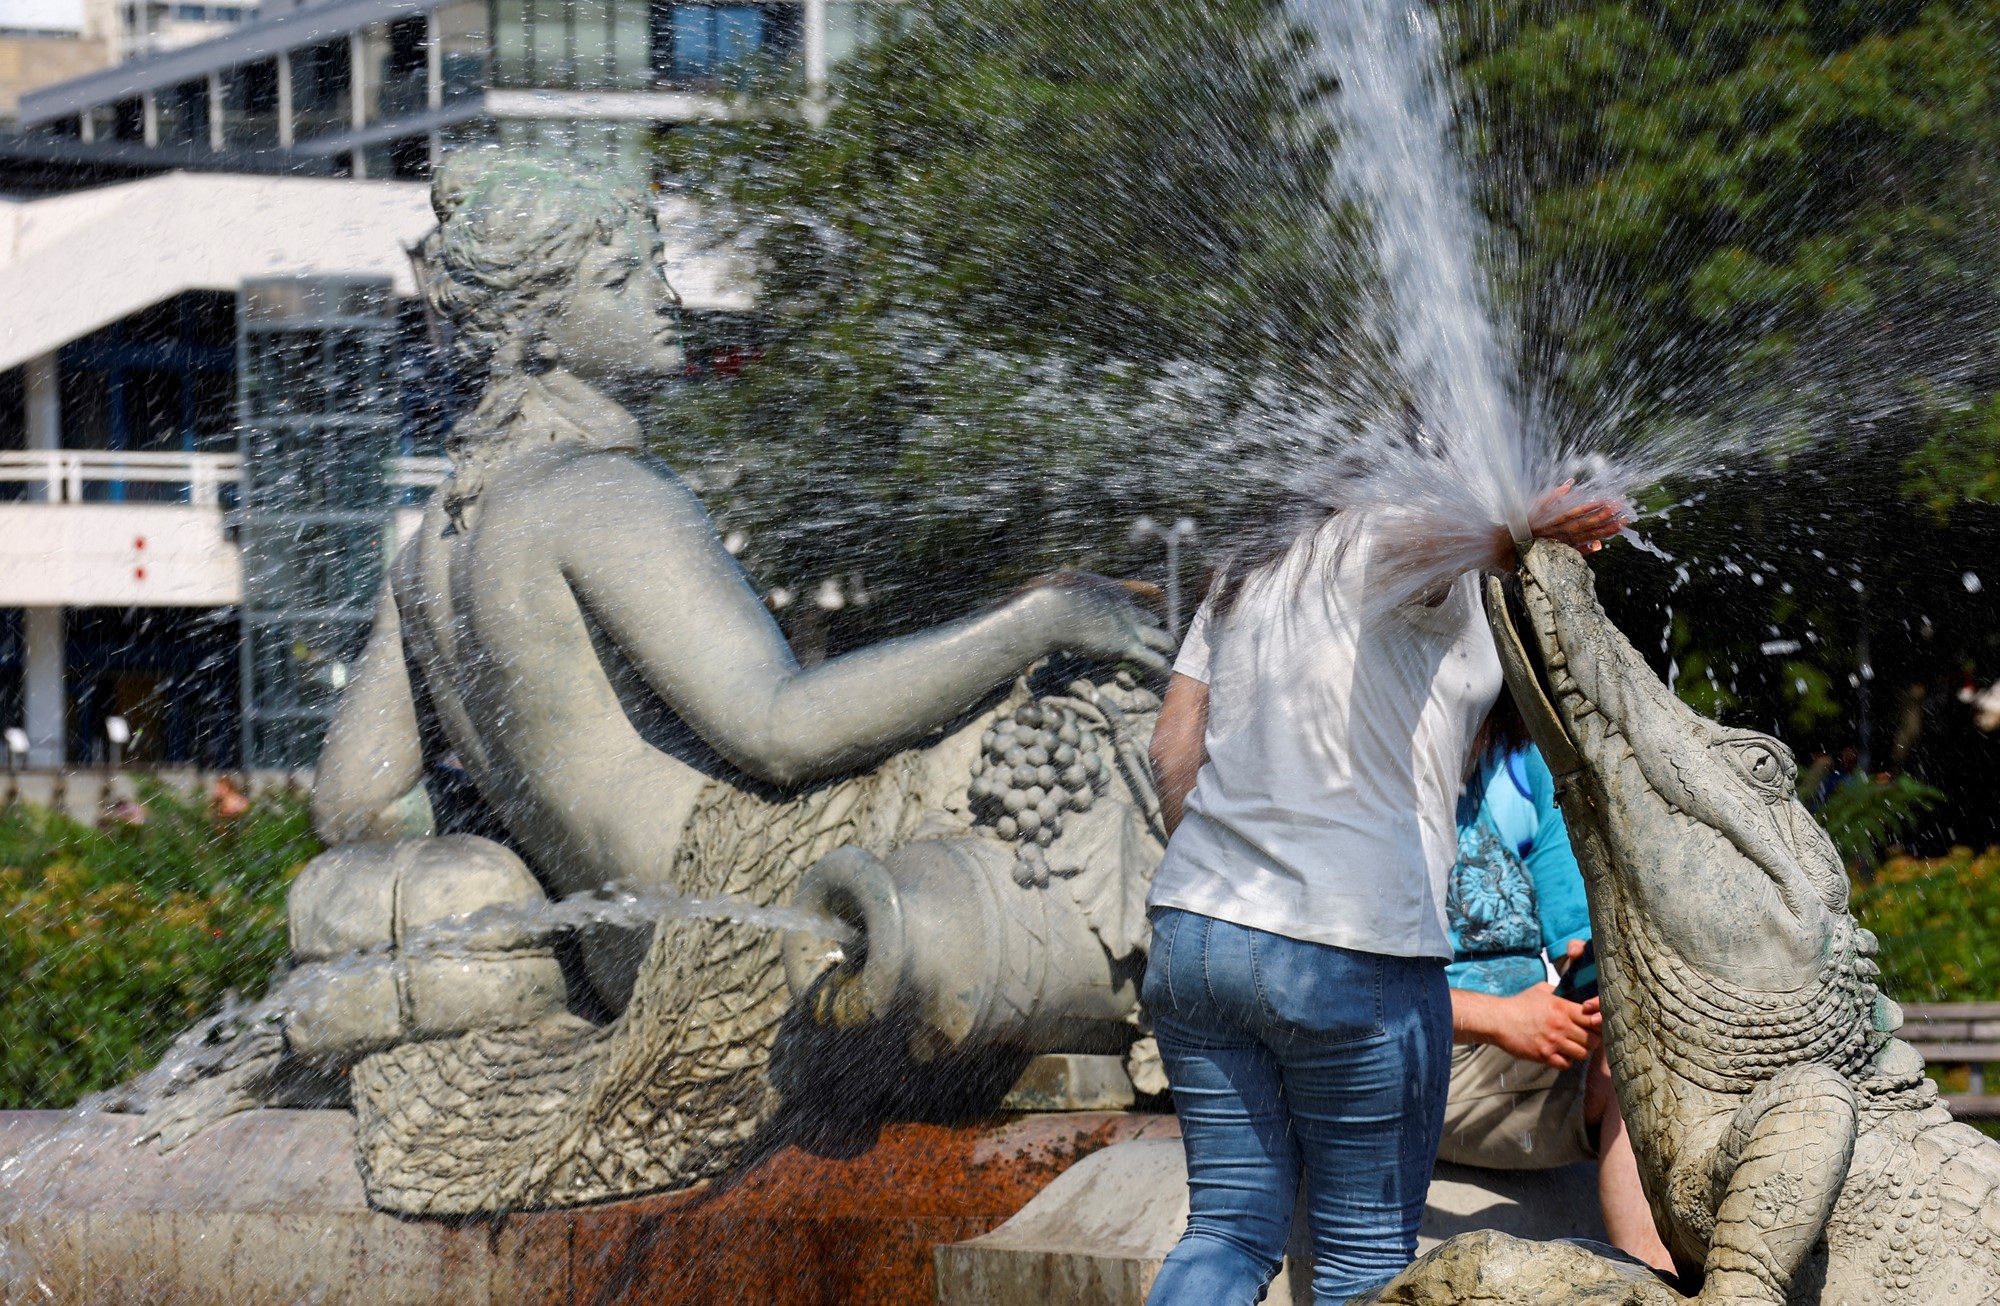 A person cools off in Neptune Fountain in Berlin.